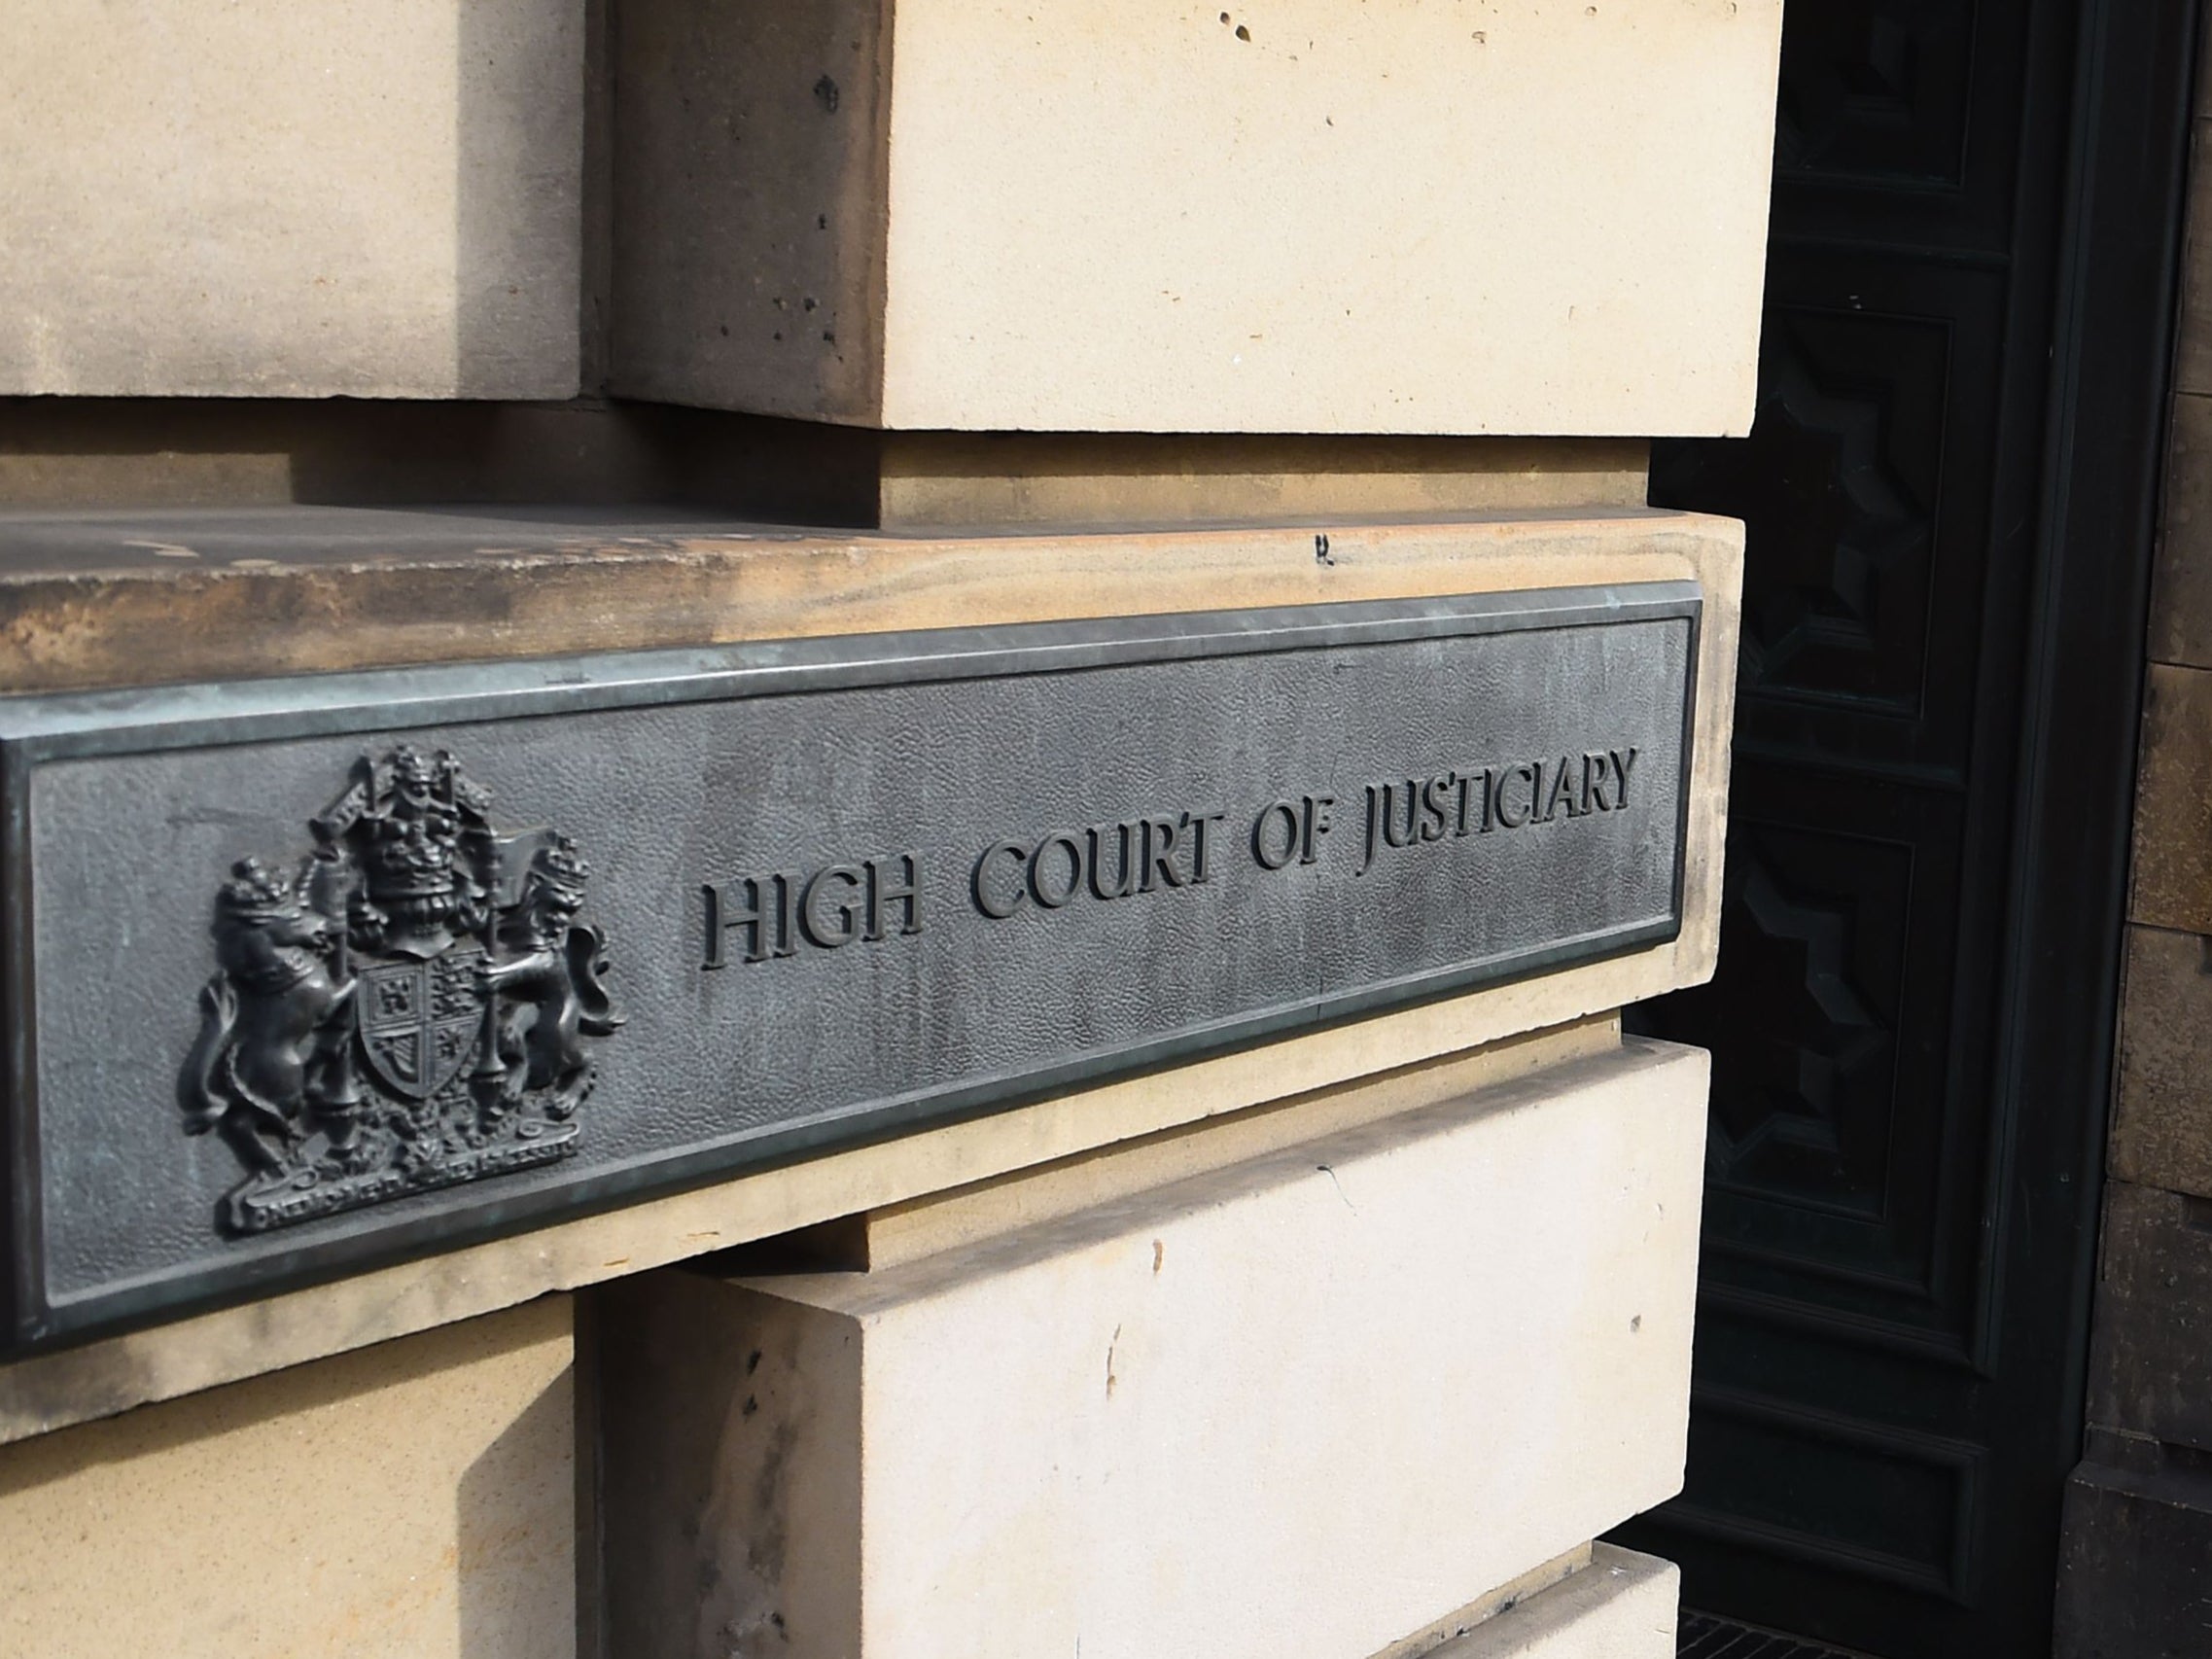 The trial is ongoing at the High Court in Edinburgh